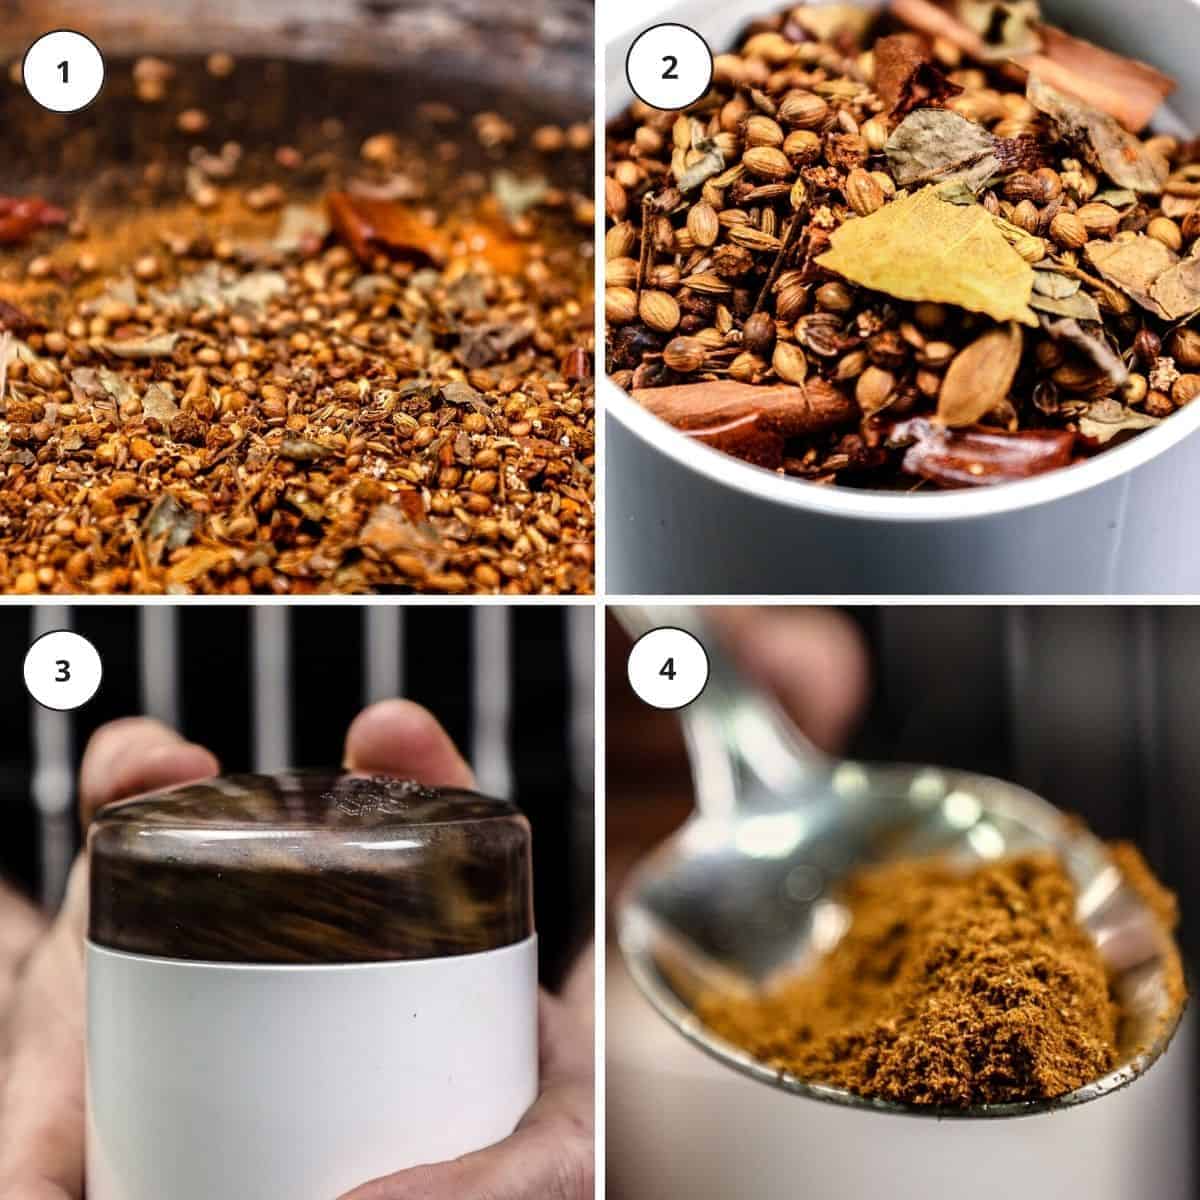 Picture steps for making homemade curry powder.